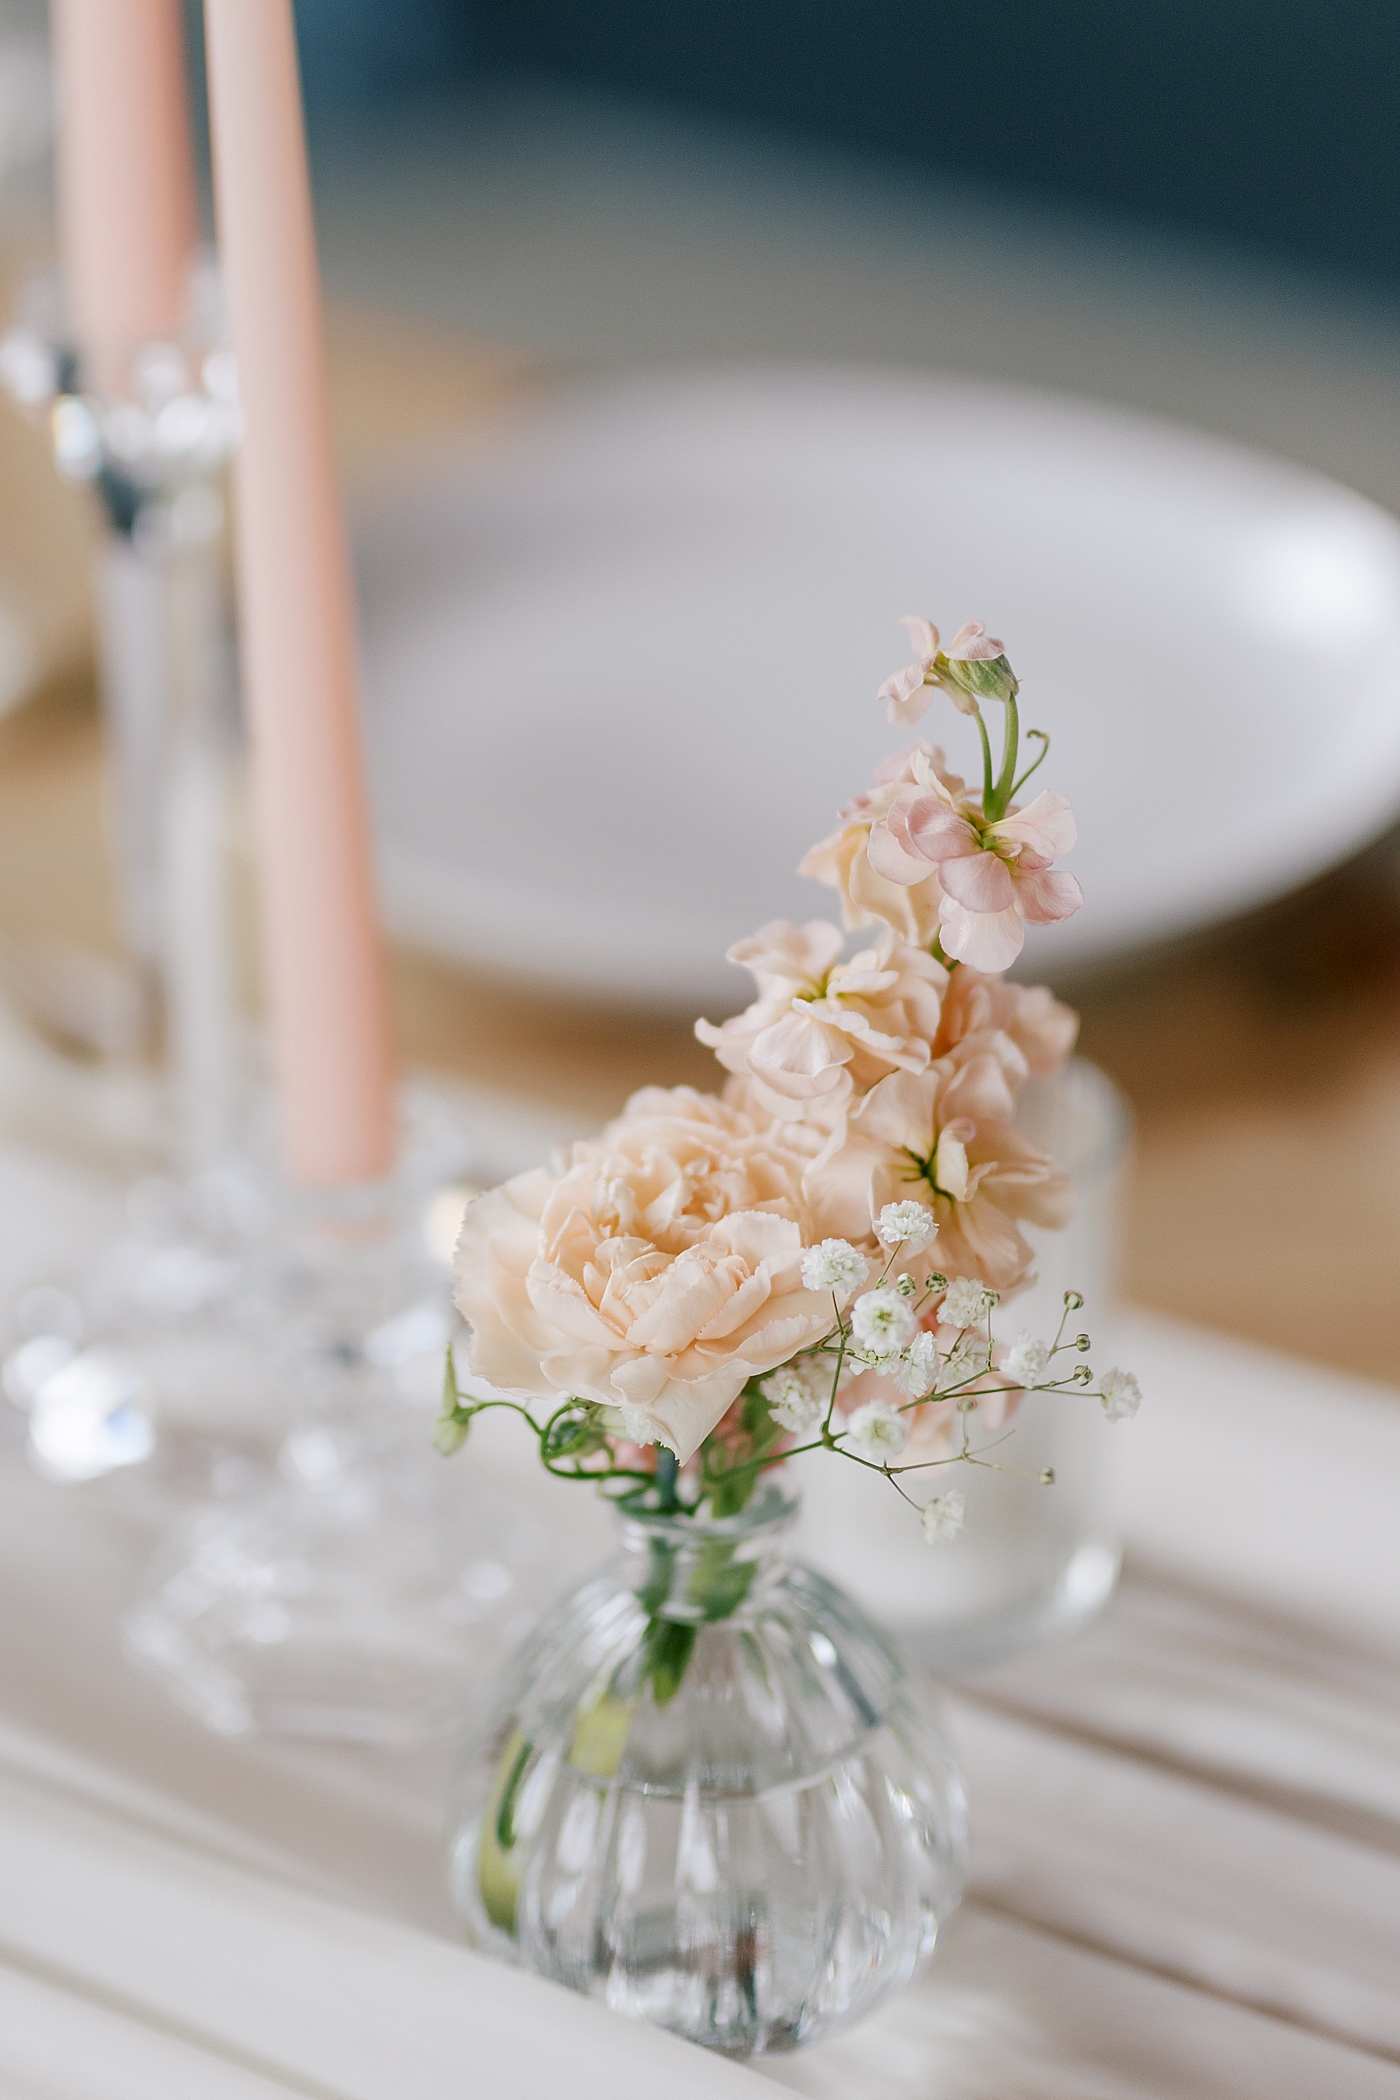 Pink stock flower in a glass vase | Image by Hope Helmuth Photography 